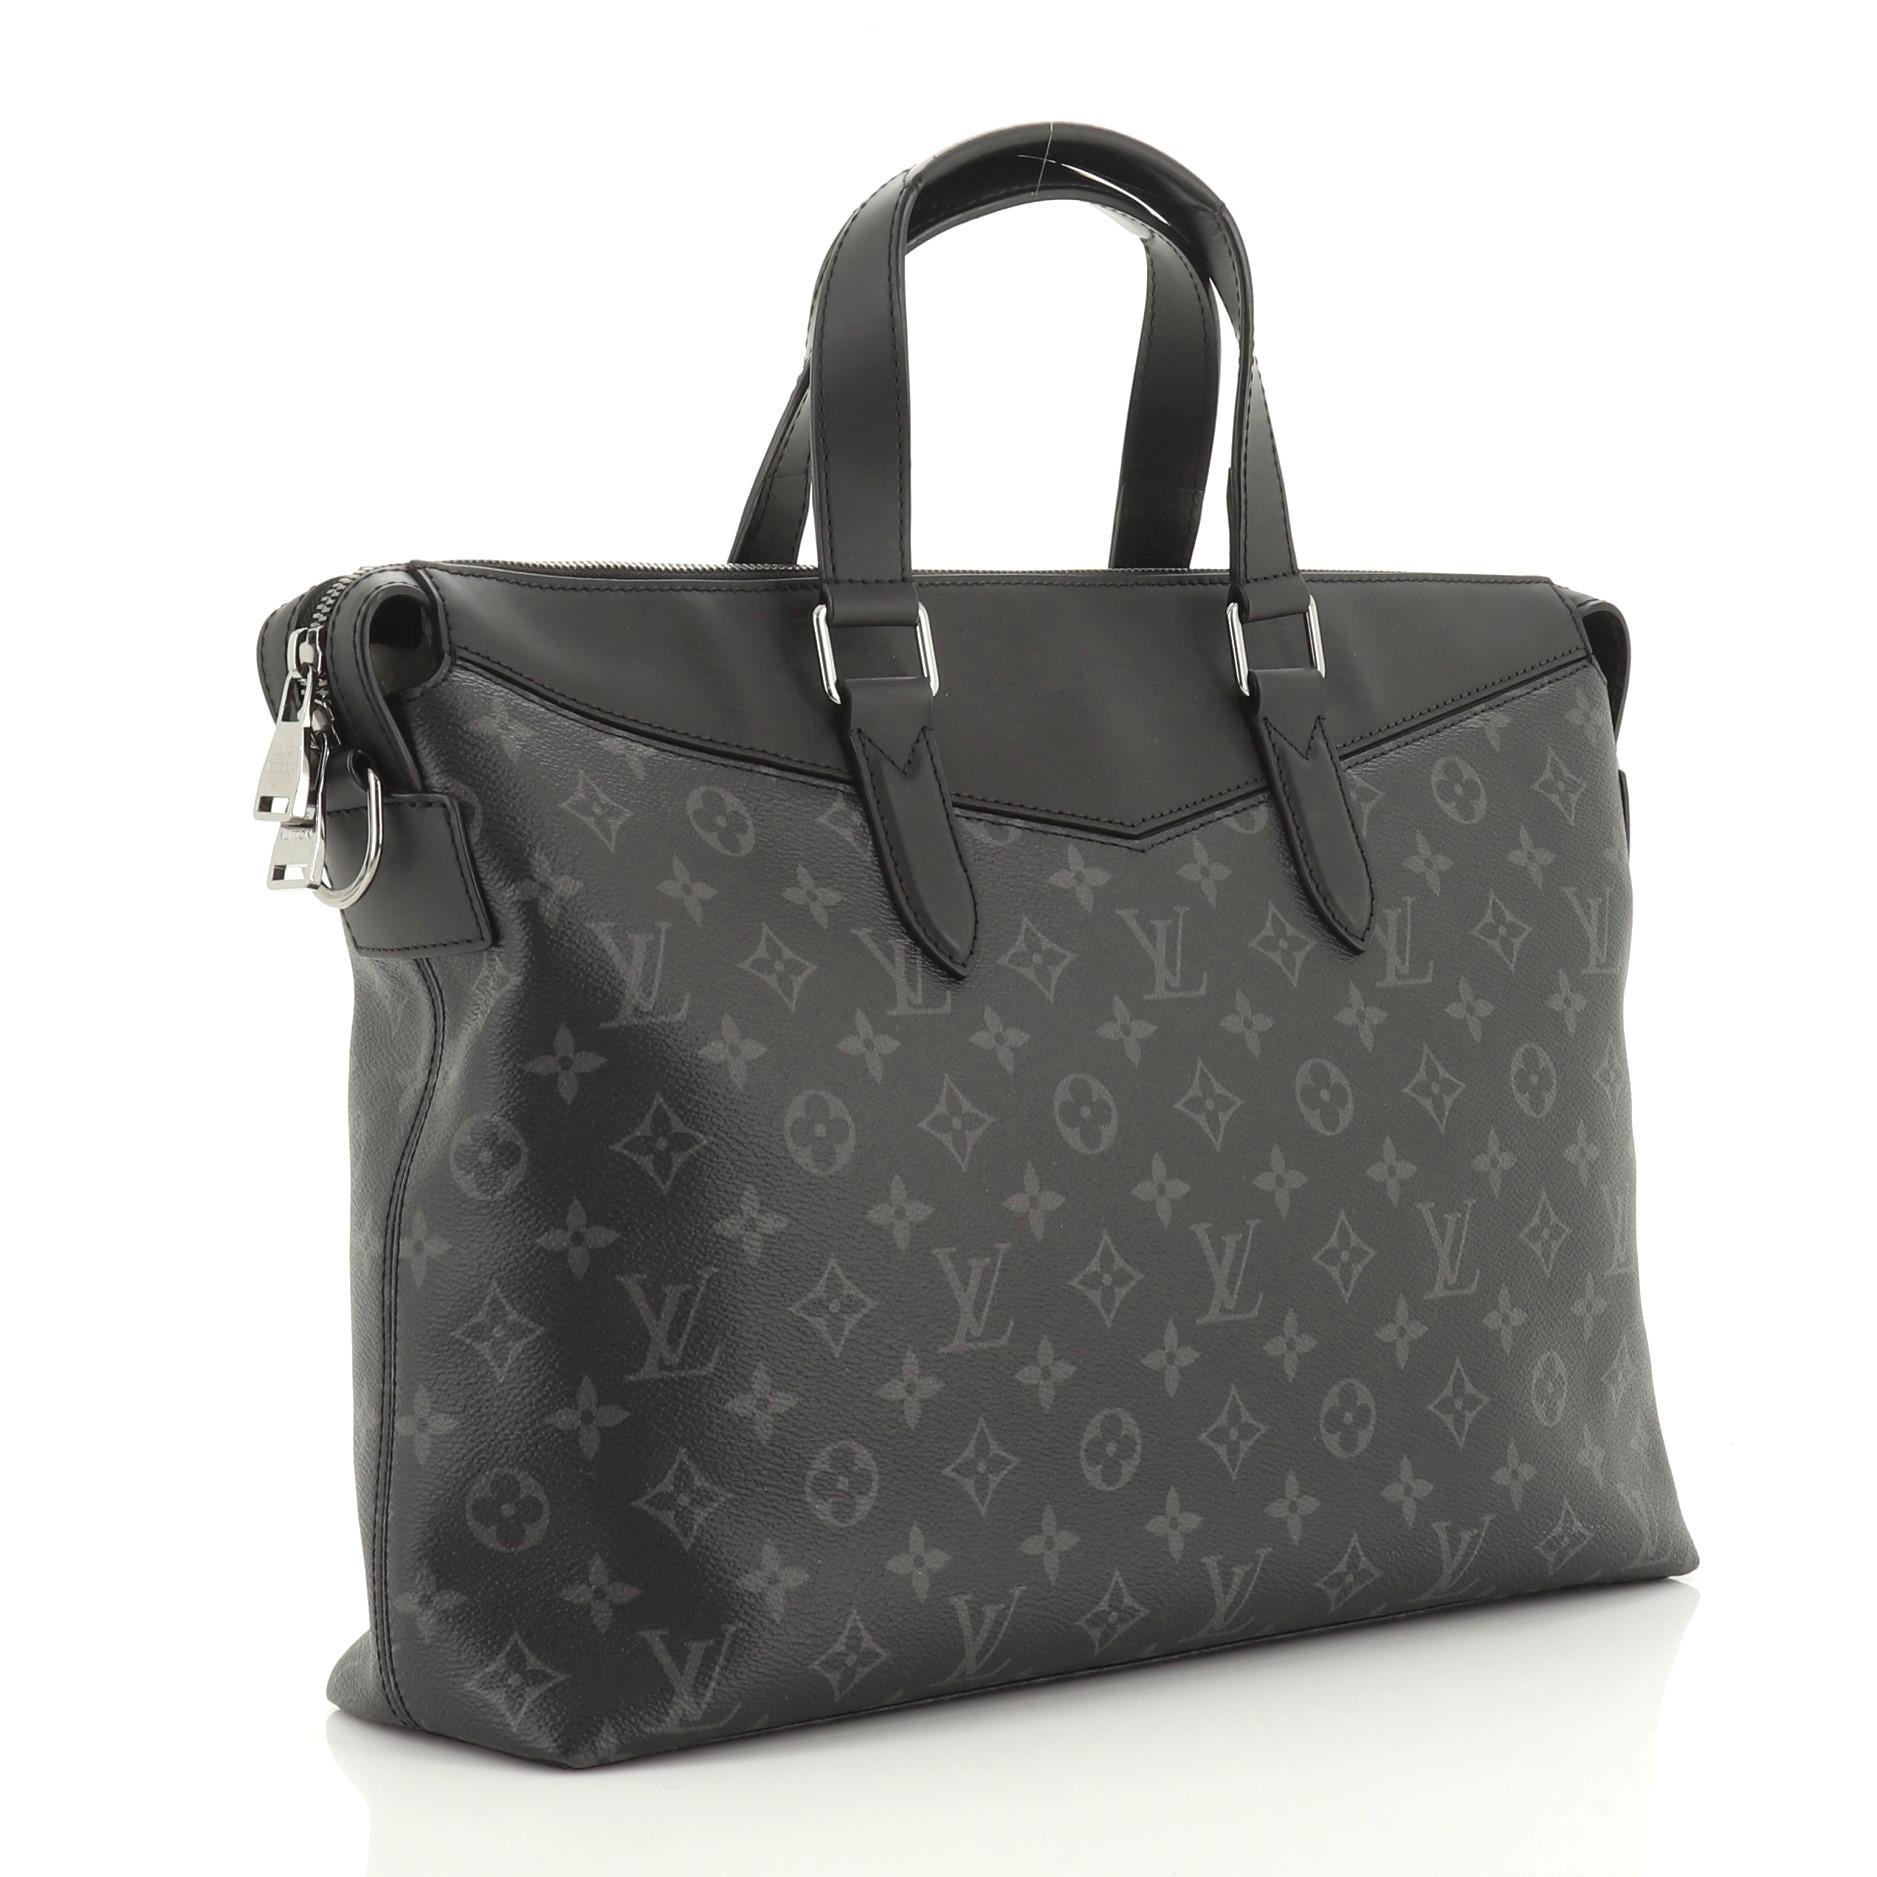 This Louis Vuitton Explorer Briefcase Monogram Eclipse Canvas, crafted in black eclipse monogram coated canvas, features dual-flat leather handles, adjustable shoulder strap, black leather trims, and gunmetal-tone hardware. Its zip closure opens to